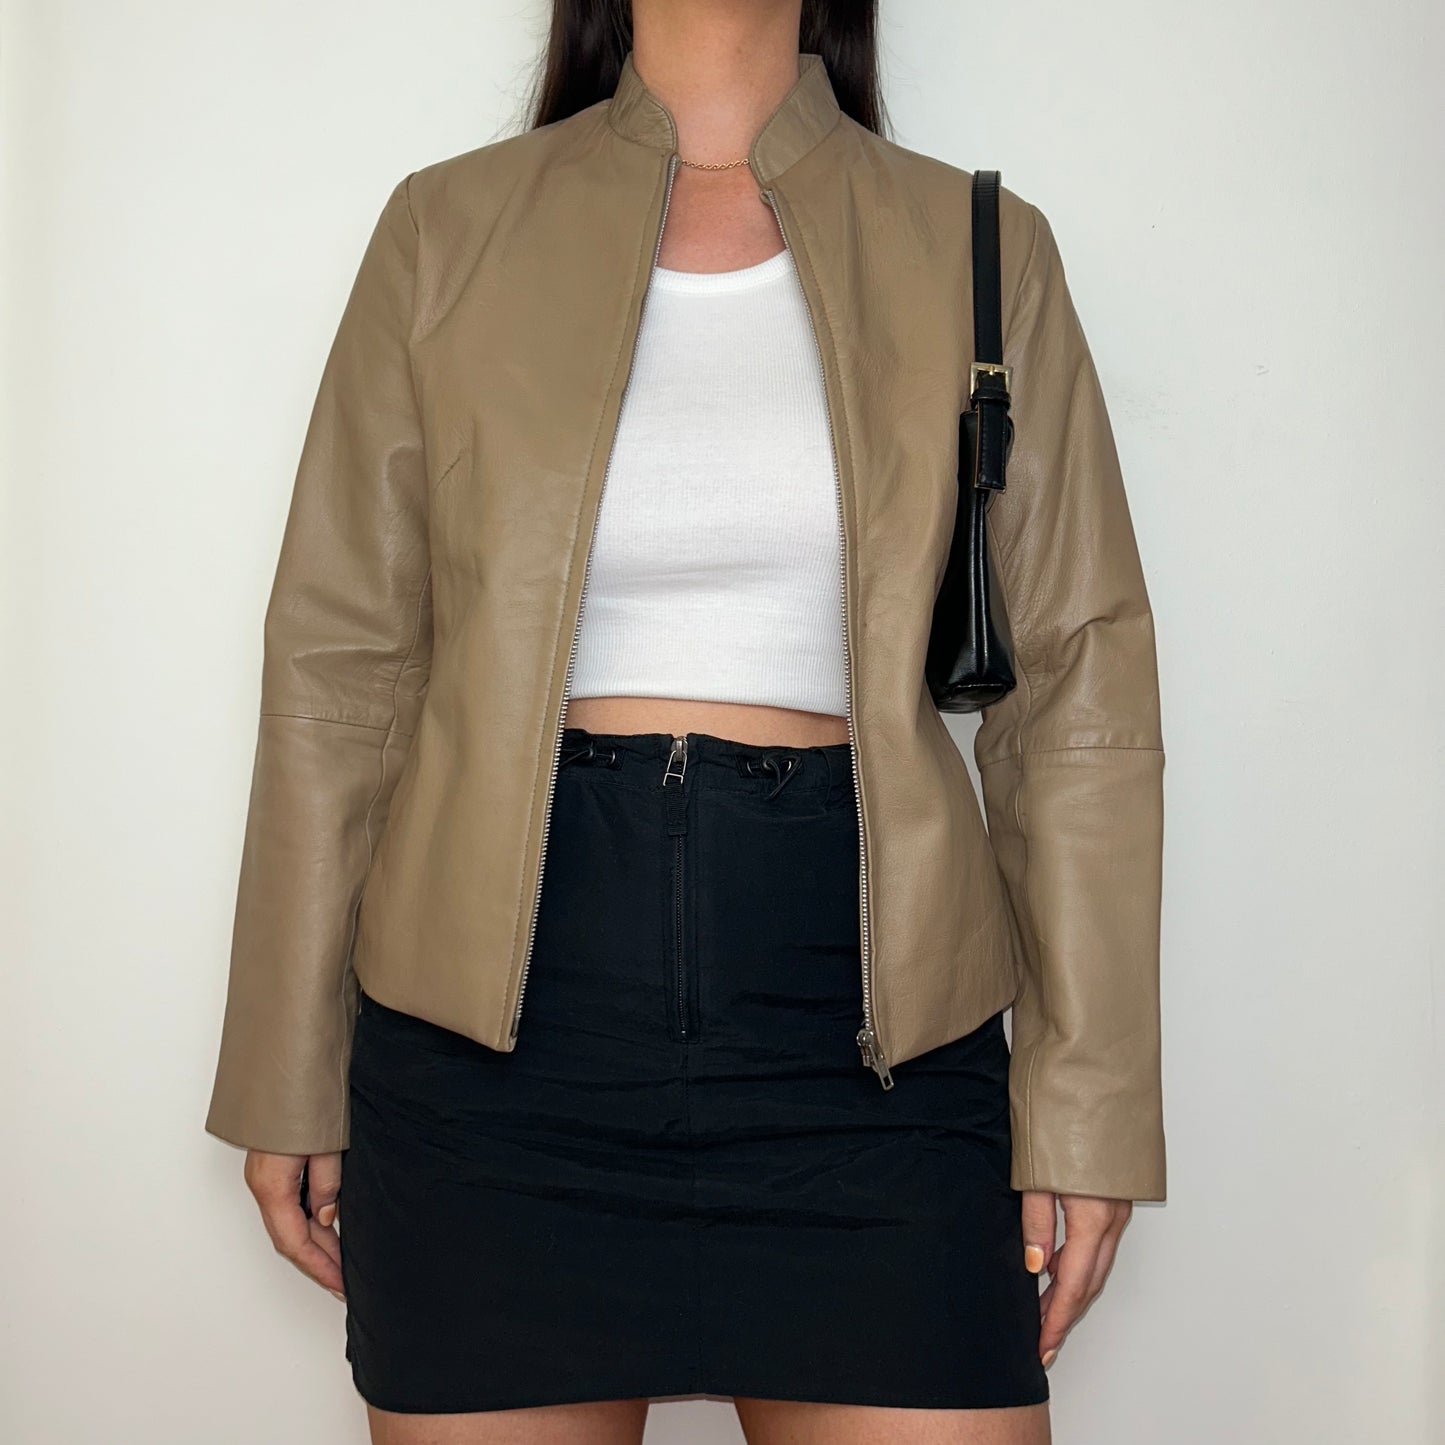 tan beige real leather jacket shown on a model wearing a white crop top and black mini skirt and a black shoulder bag